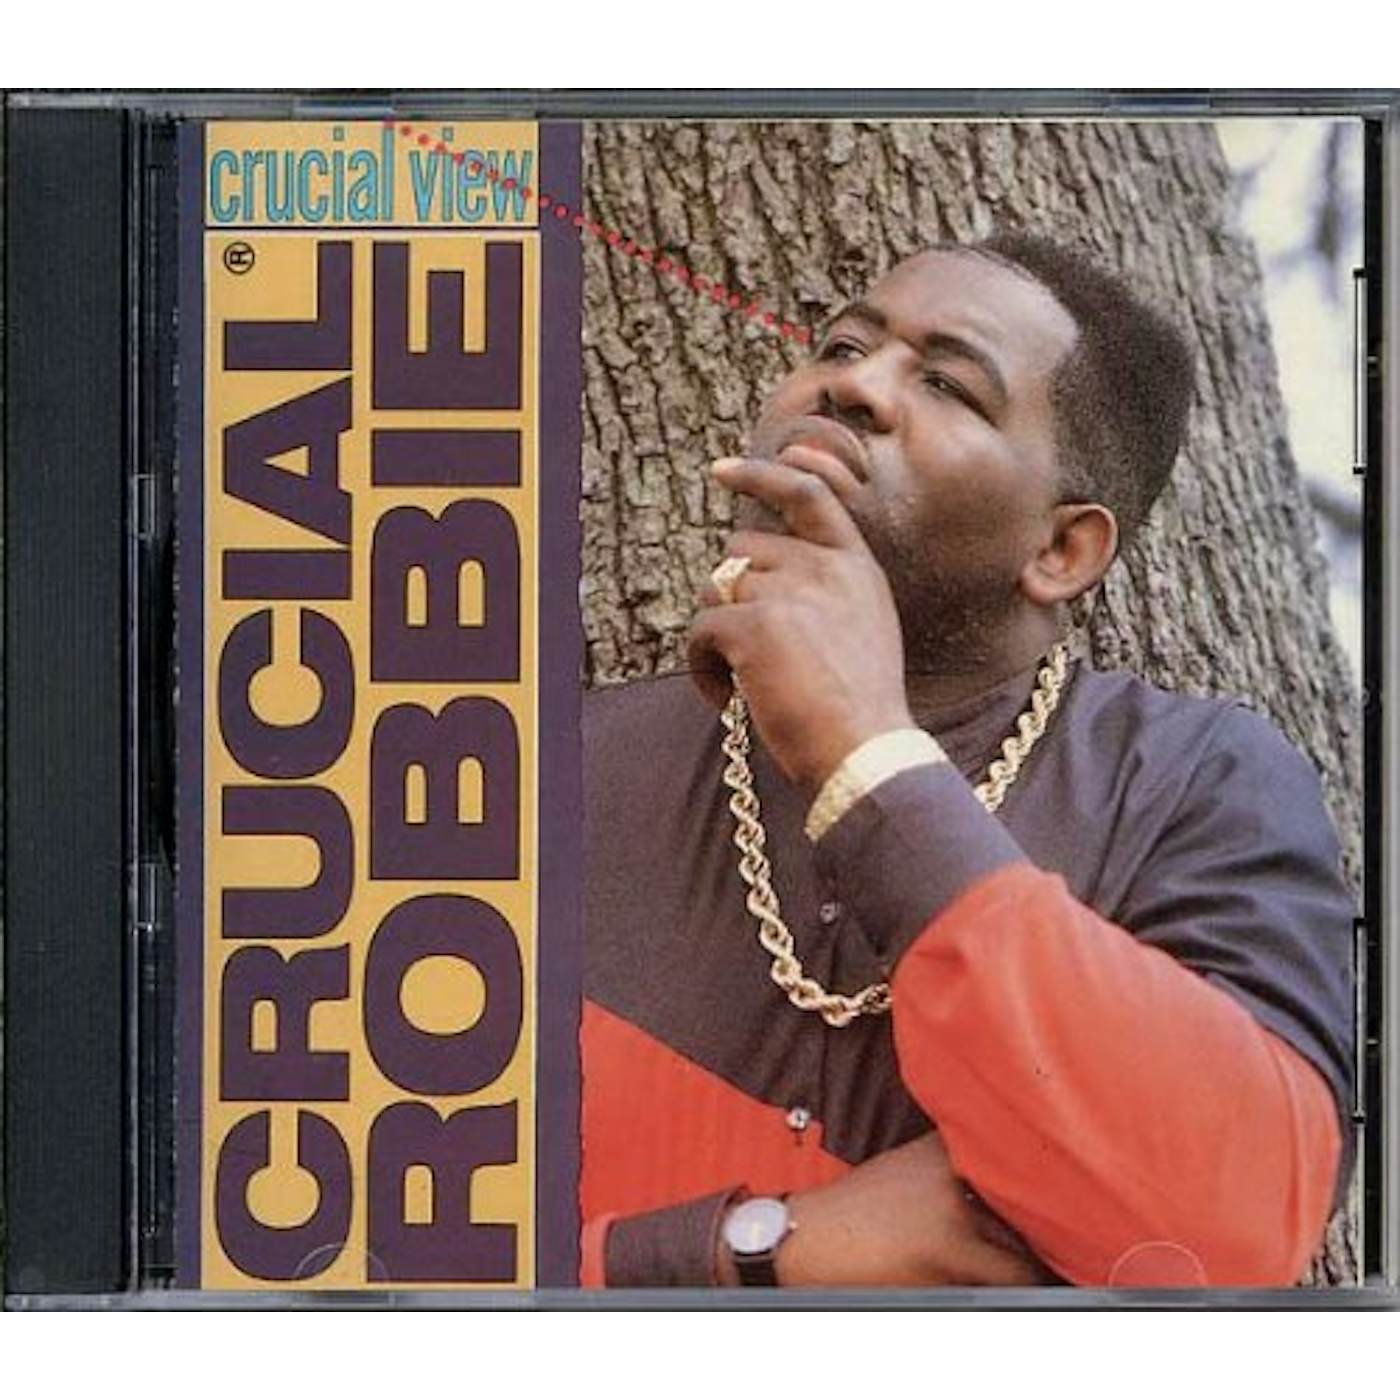 Crucial Robbie Crucial View Vinyl Record